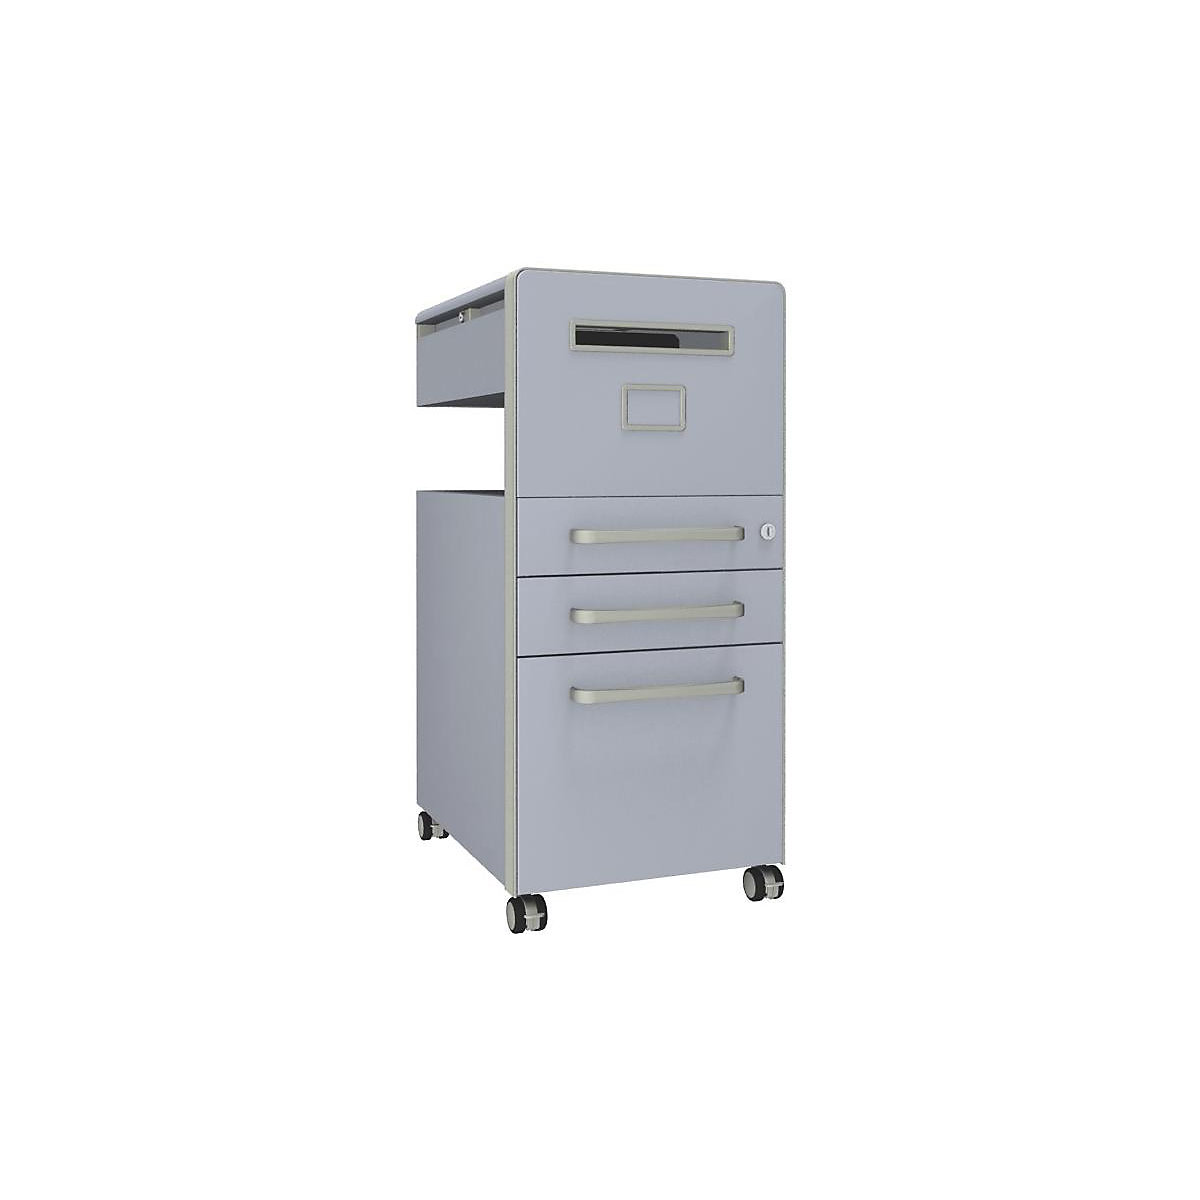 Bite™ pedestal furniture, with 1 whiteboard, opens on the right side – BISLEY, with 2 universal drawers, 1 suspension file drawer, alaska-1